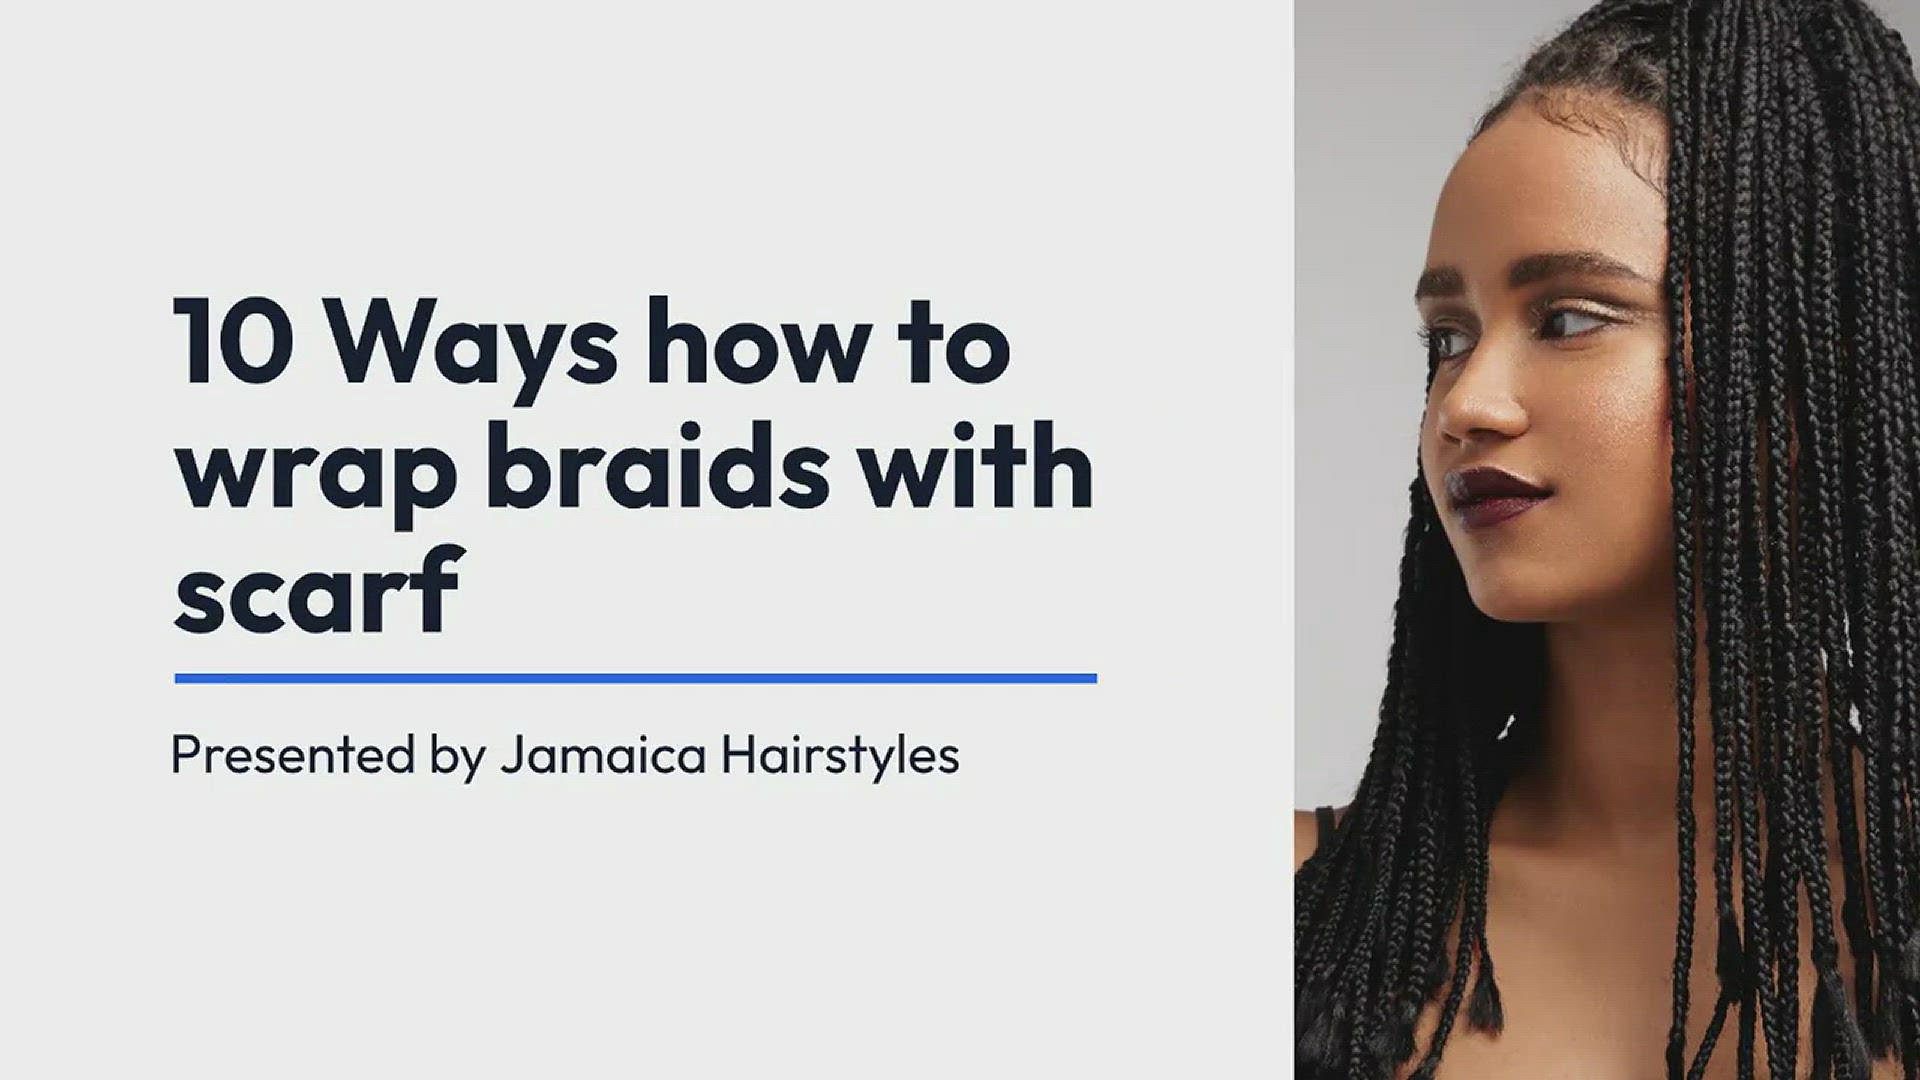 'Video thumbnail for 10 Ways how to wrap braids with scarf'